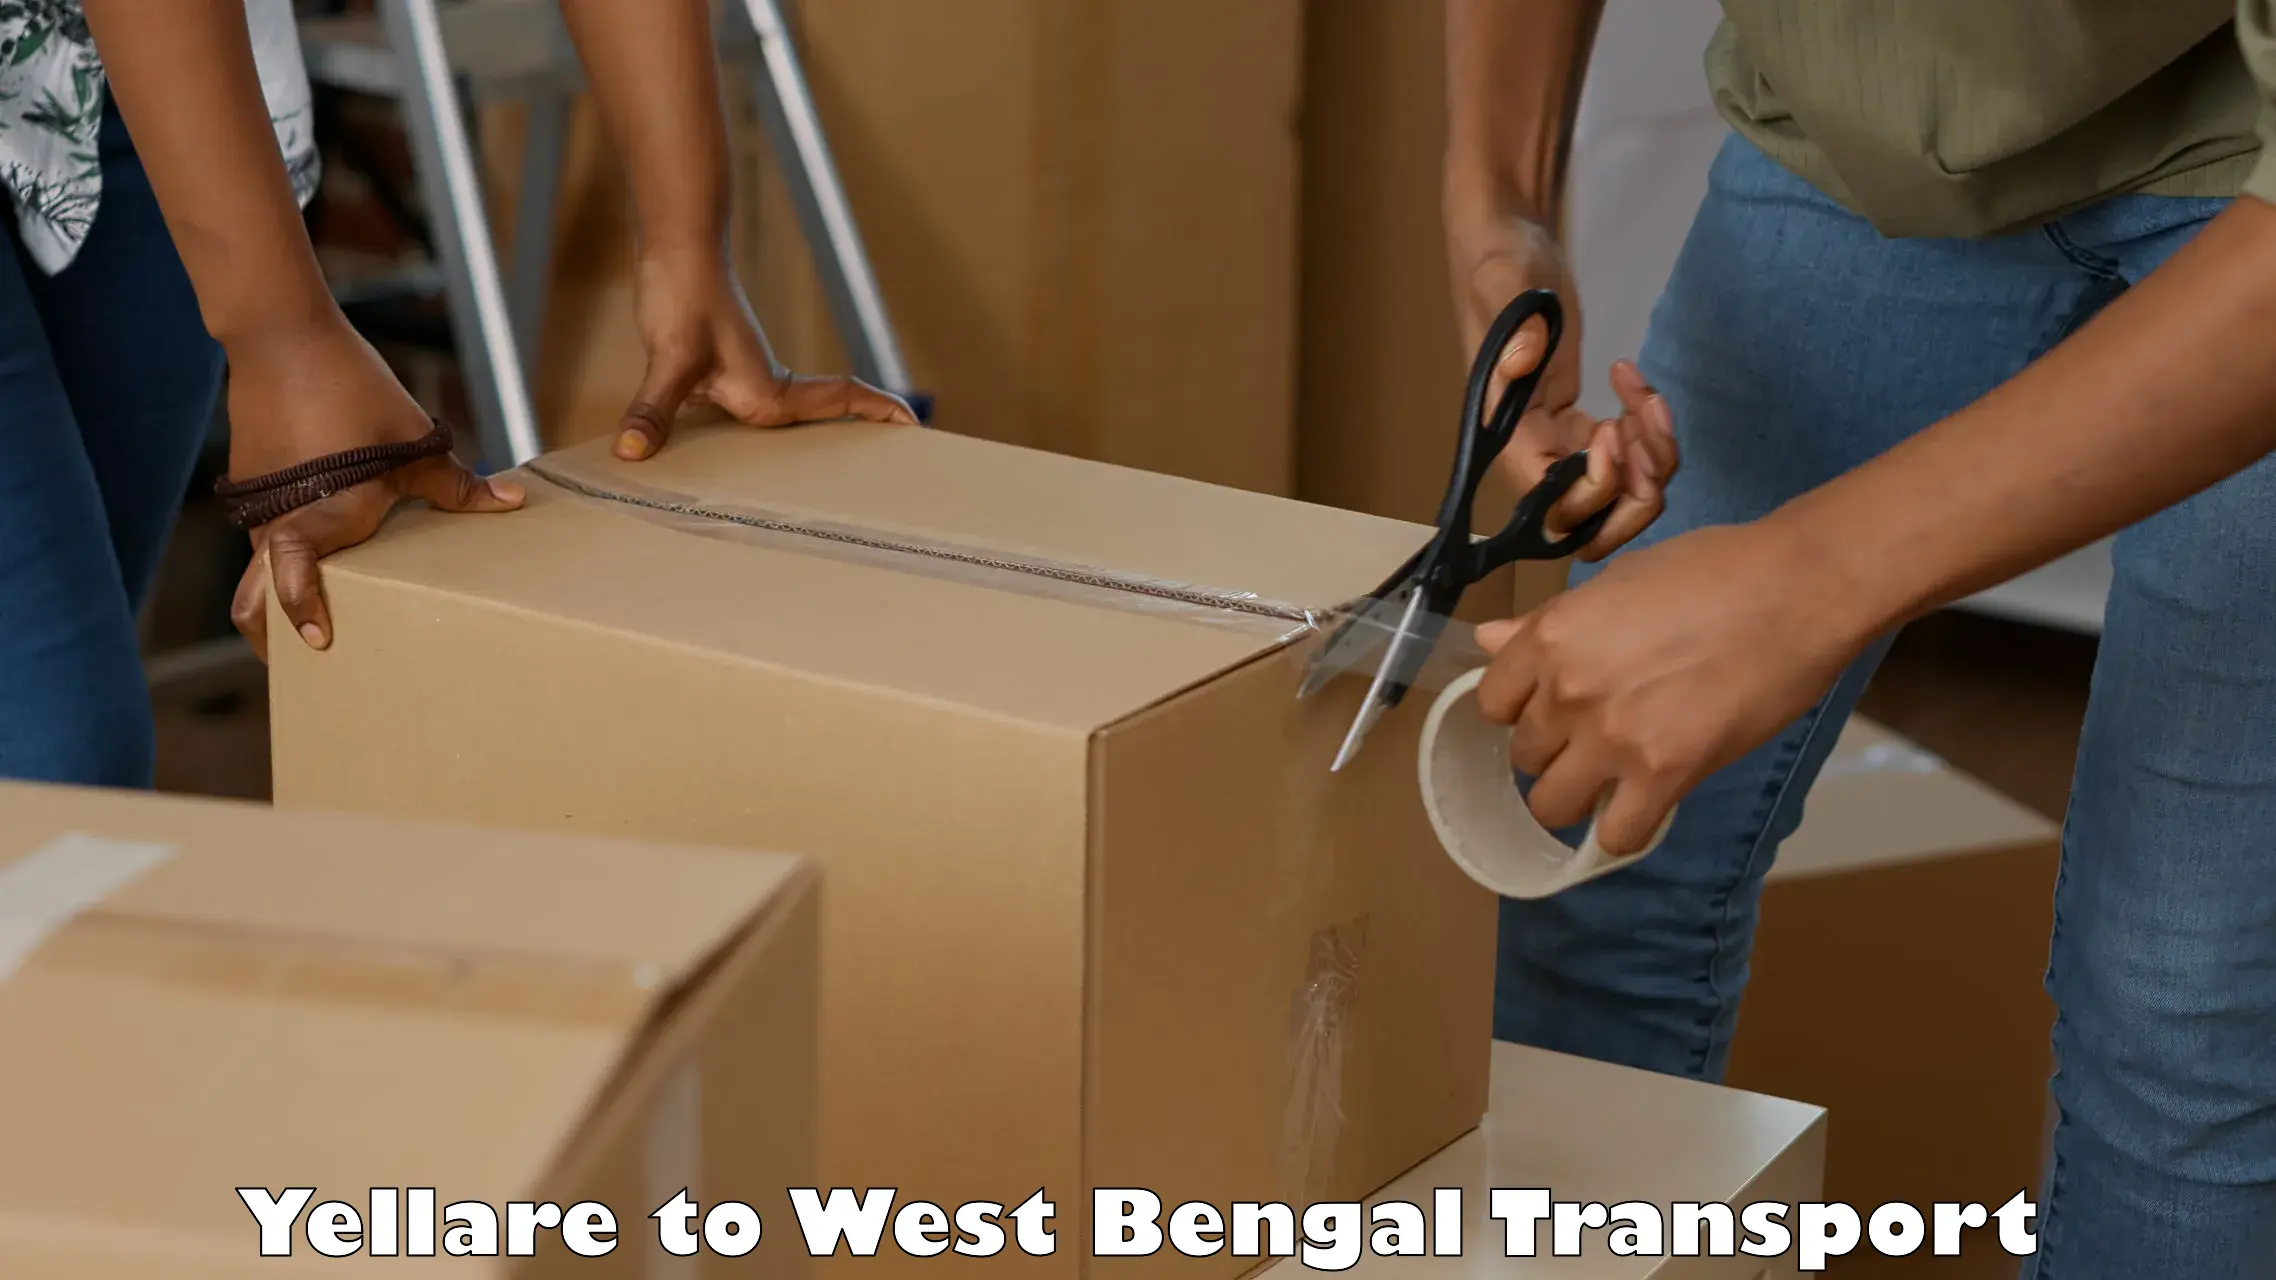 Furniture transport service Yellare to West Bengal